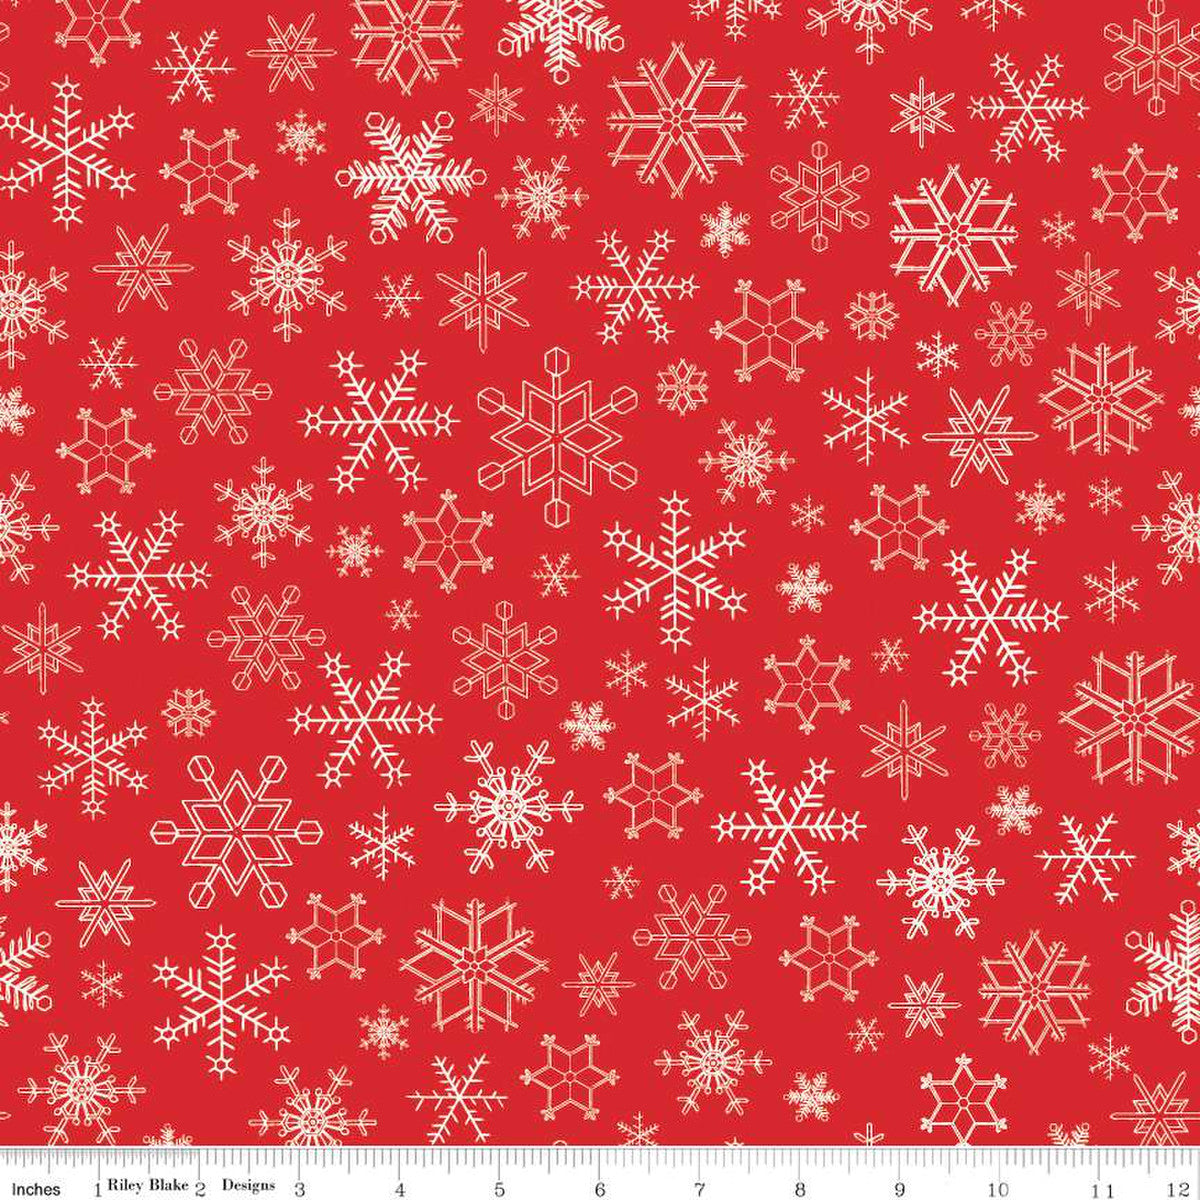 Peace on Earth, Red Snowflakes, by Riley Blake